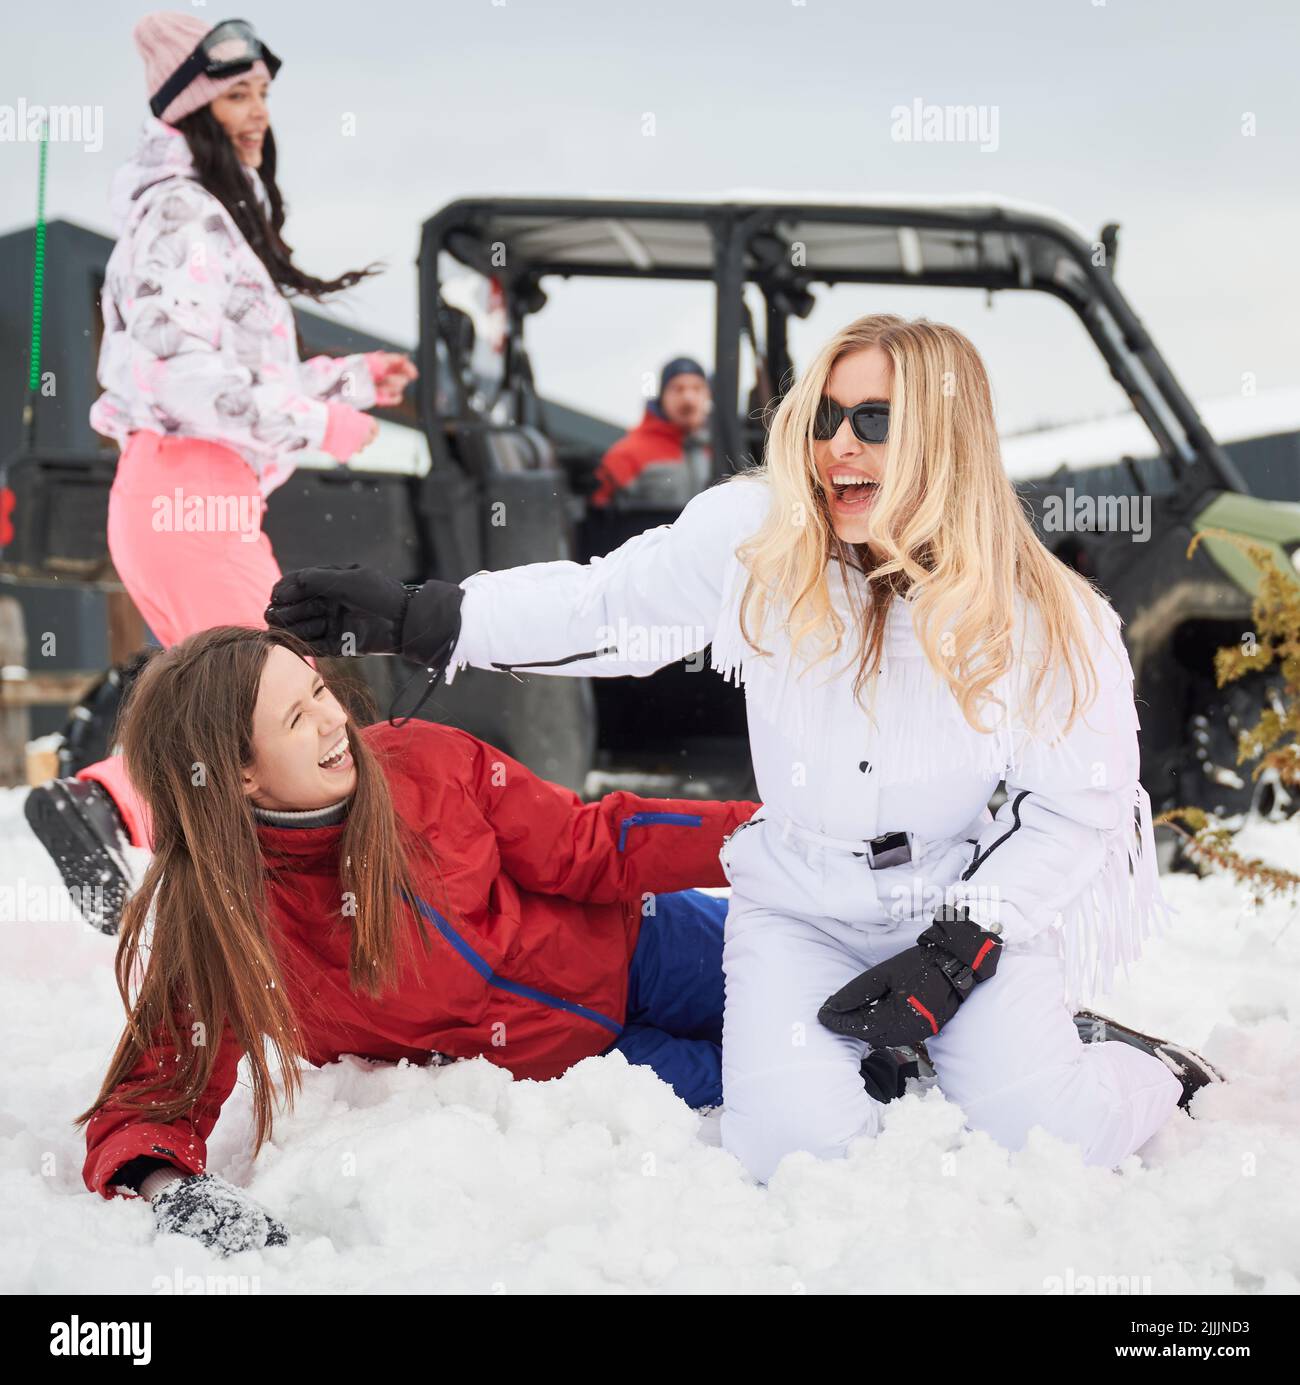 Happy women having fun in snow. Off-road buggy car on background. Concept of active leisure and winter activities. Stock Photo